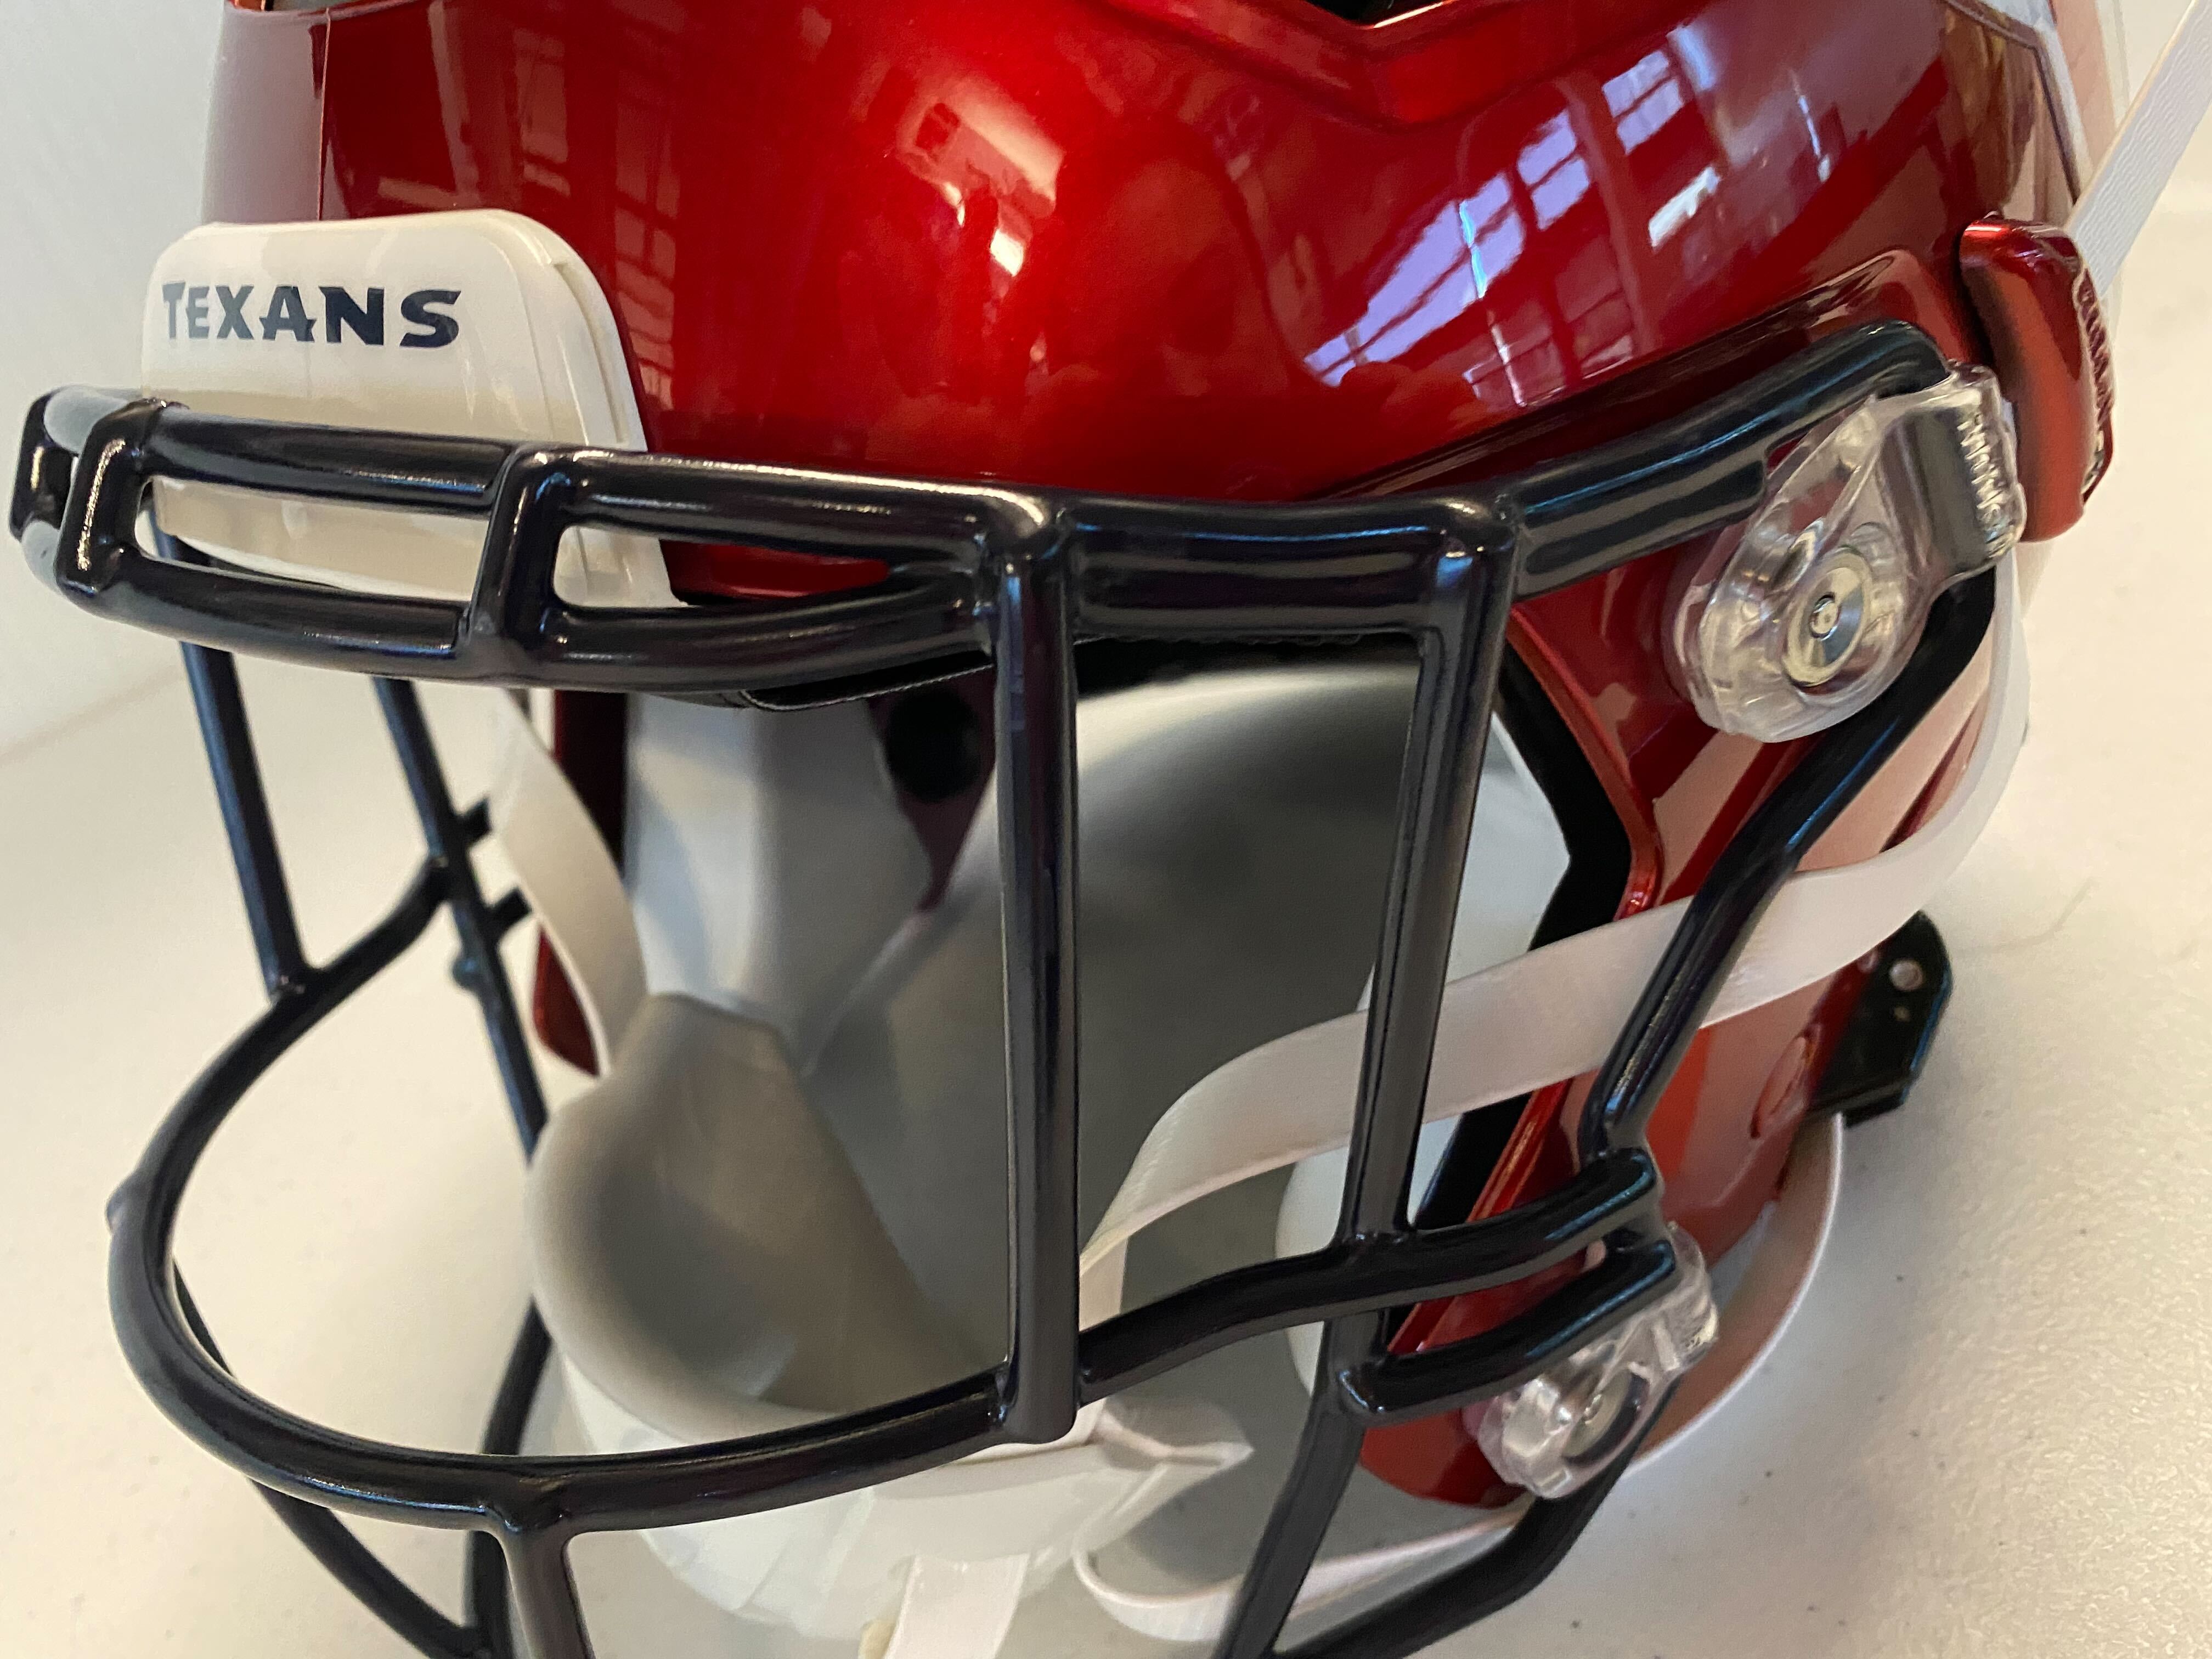 Texas will wear red helmets three times, the most allowed by NFL